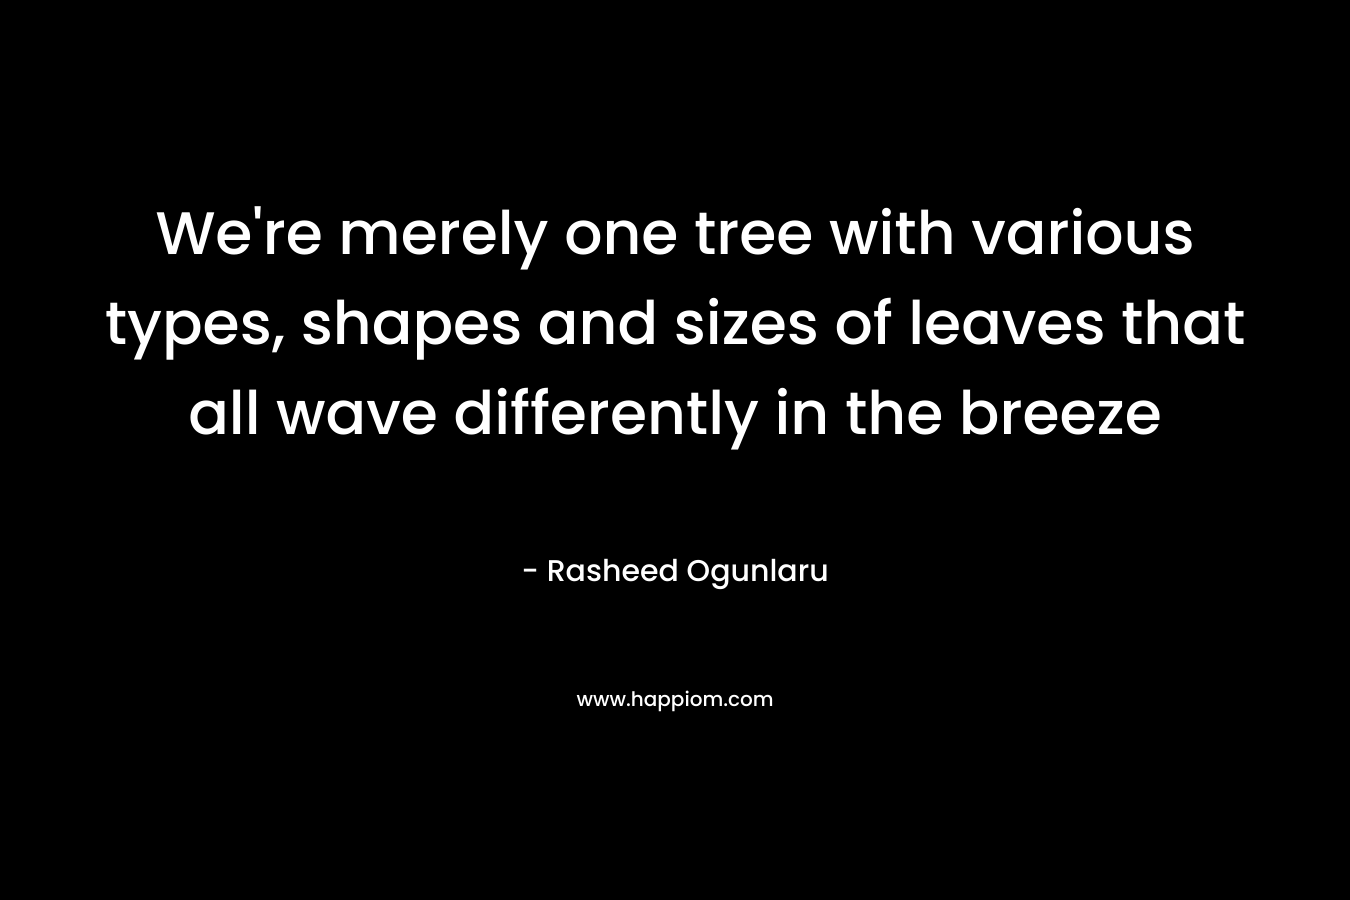 We’re merely one tree with various types, shapes and sizes of leaves that all wave differently in the breeze – Rasheed Ogunlaru